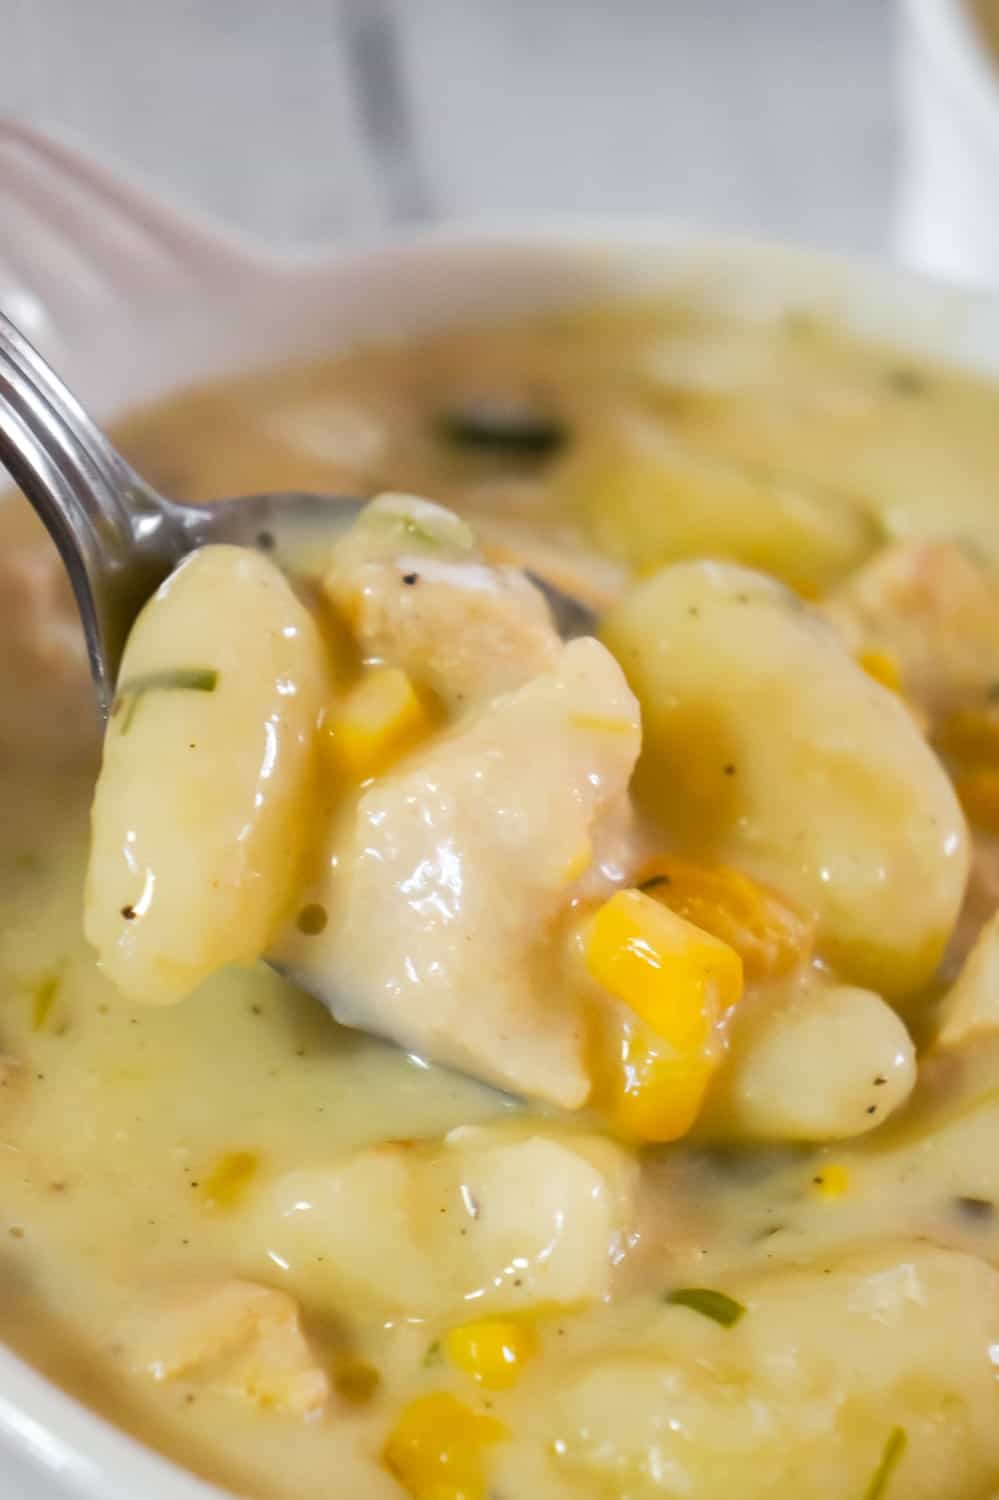 Instant Pot Chicken Gnocchi Soup with Cream Cheese is a hearty soup recipe perfect for weeknight dinners. This creamy soup is loaded with potato gnocchi, chunks of chicken breast, corn and Philadelphia Whipped Chive cream cheese.